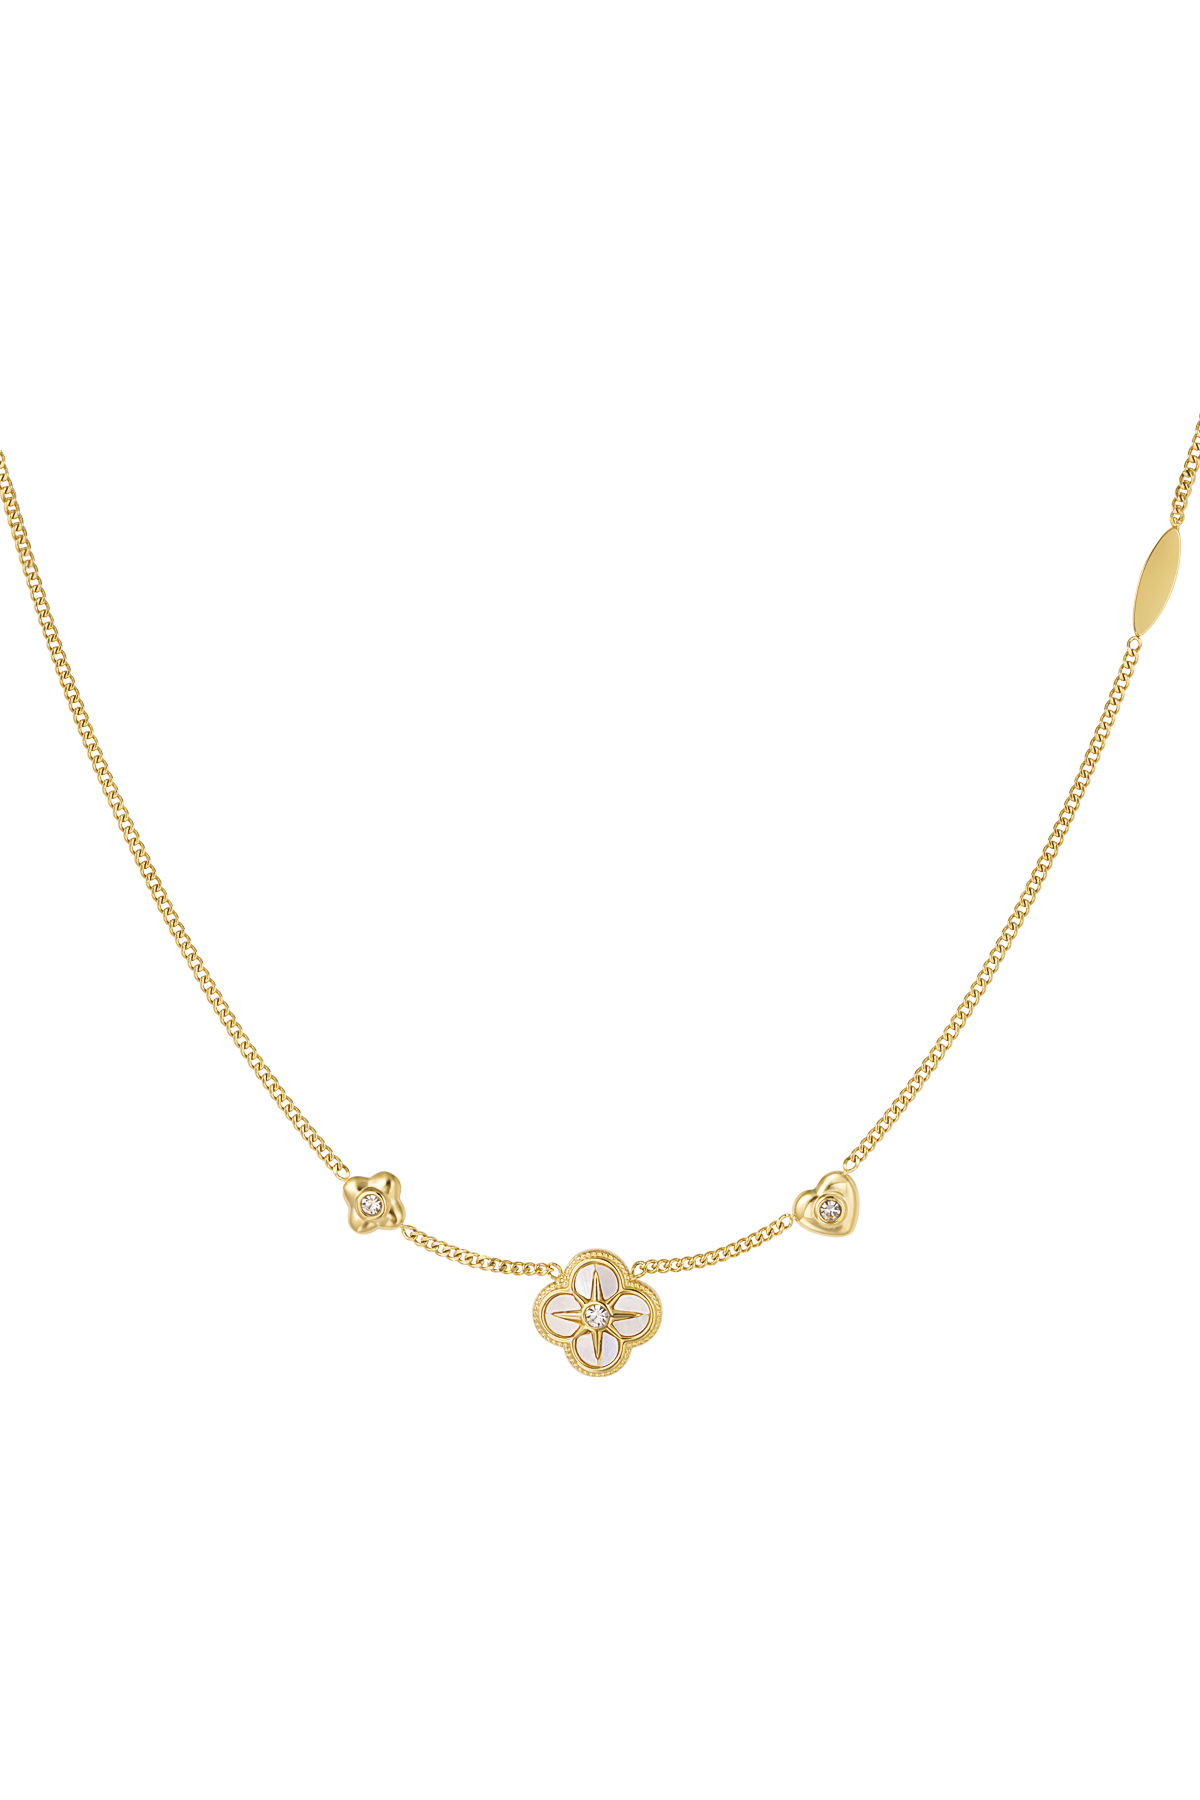 Necklace 3 clovers - gold h5 